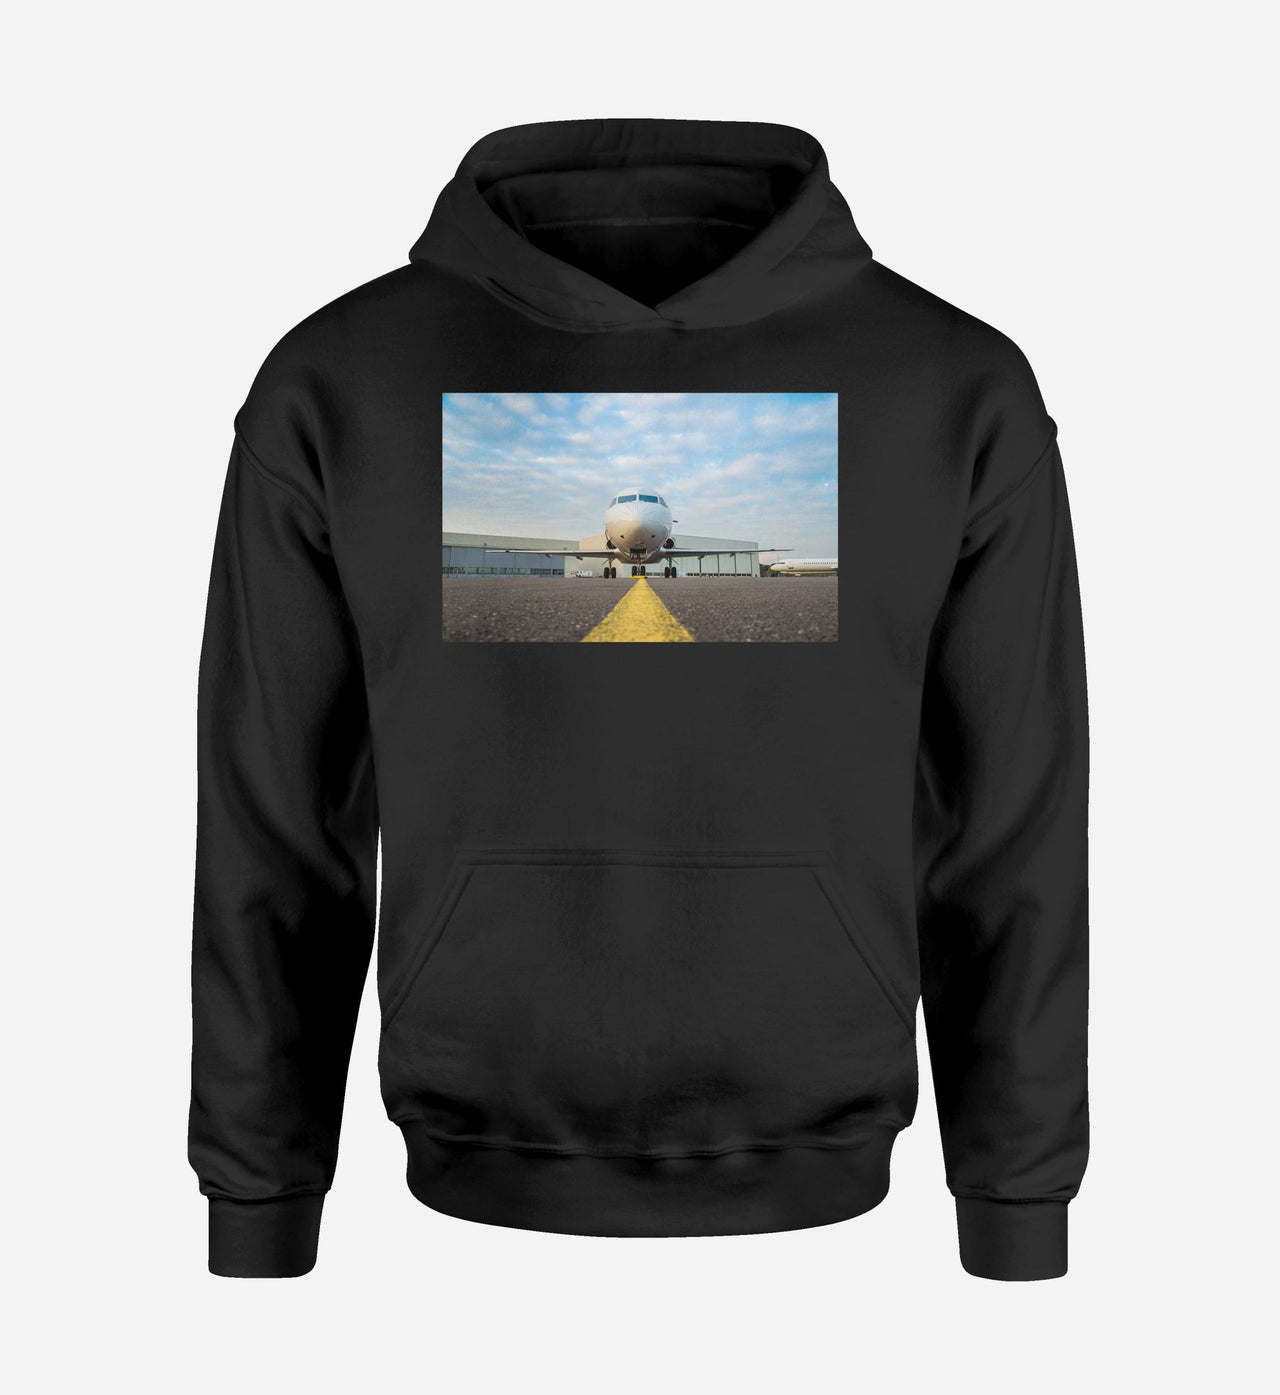 Face to Face with Beautiful Jet Designed Hoodies